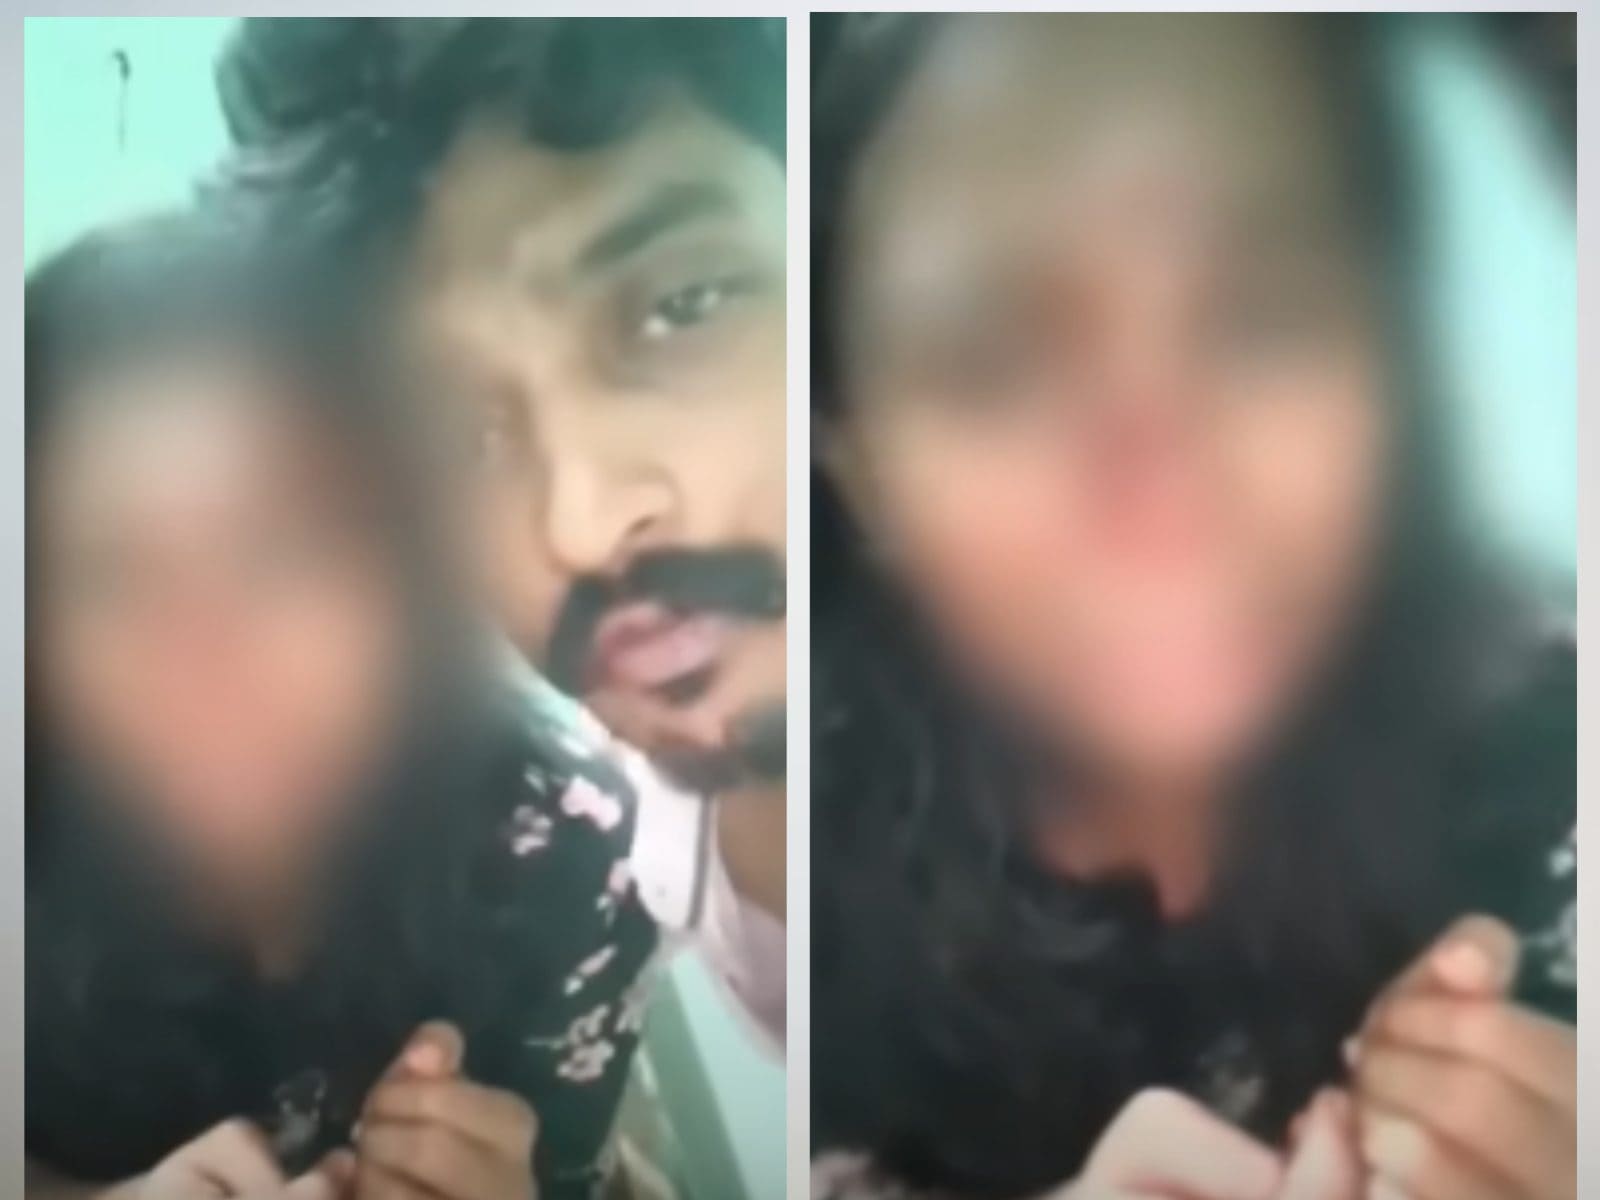 Kerala Man Thrashes Wife, Films Assault, Shares Video With Friends picture